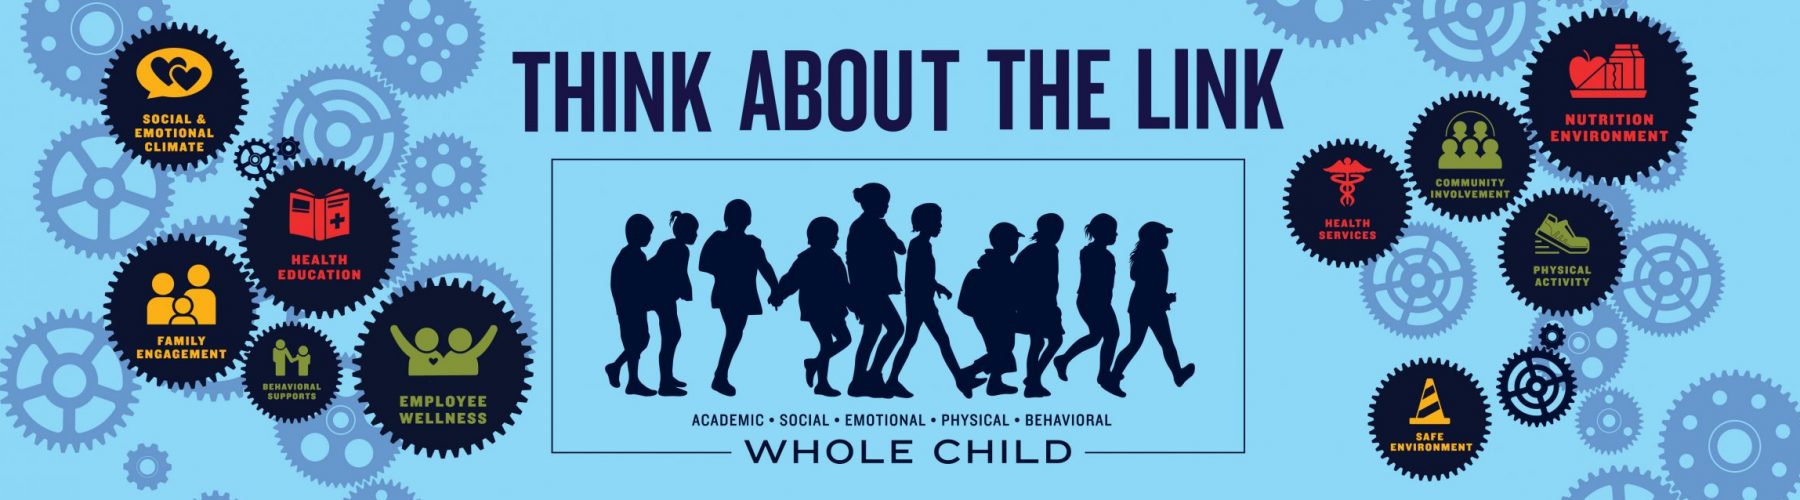 Think about the Link academic social emotional physical behavioral shows gears with 10 domains of whole school, whole community, whole child model in each gear with blue children walking together